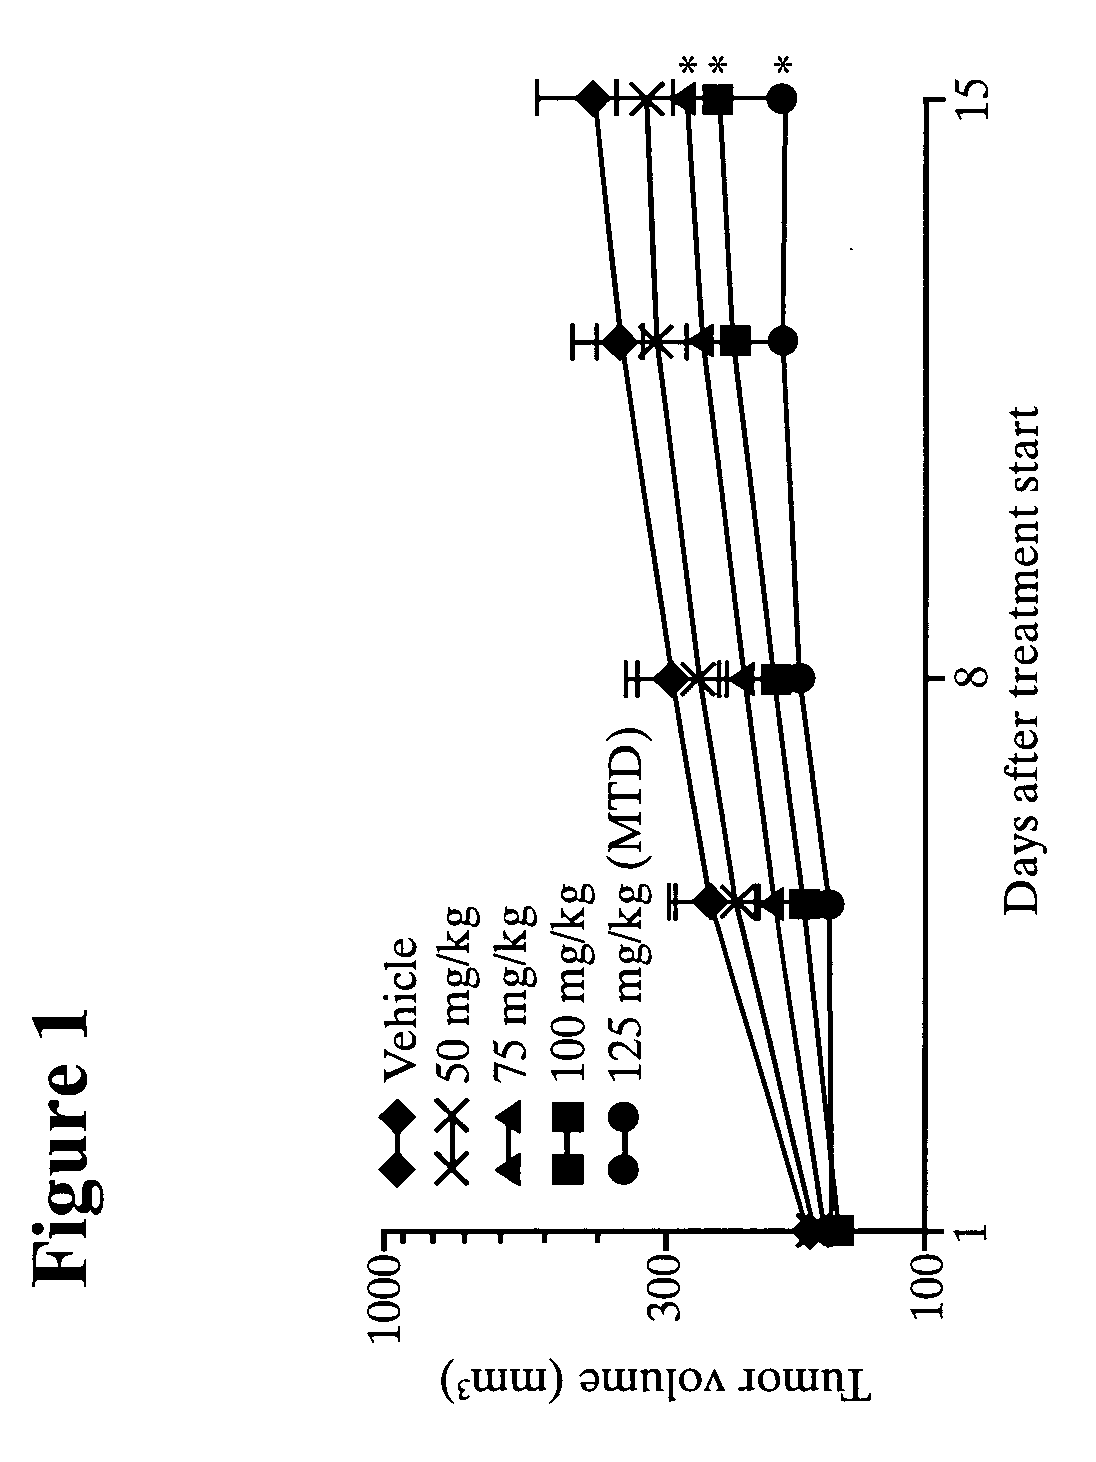 Combined treatment with capecitabine and an epidermal growth factor receptor kinase inhibitor